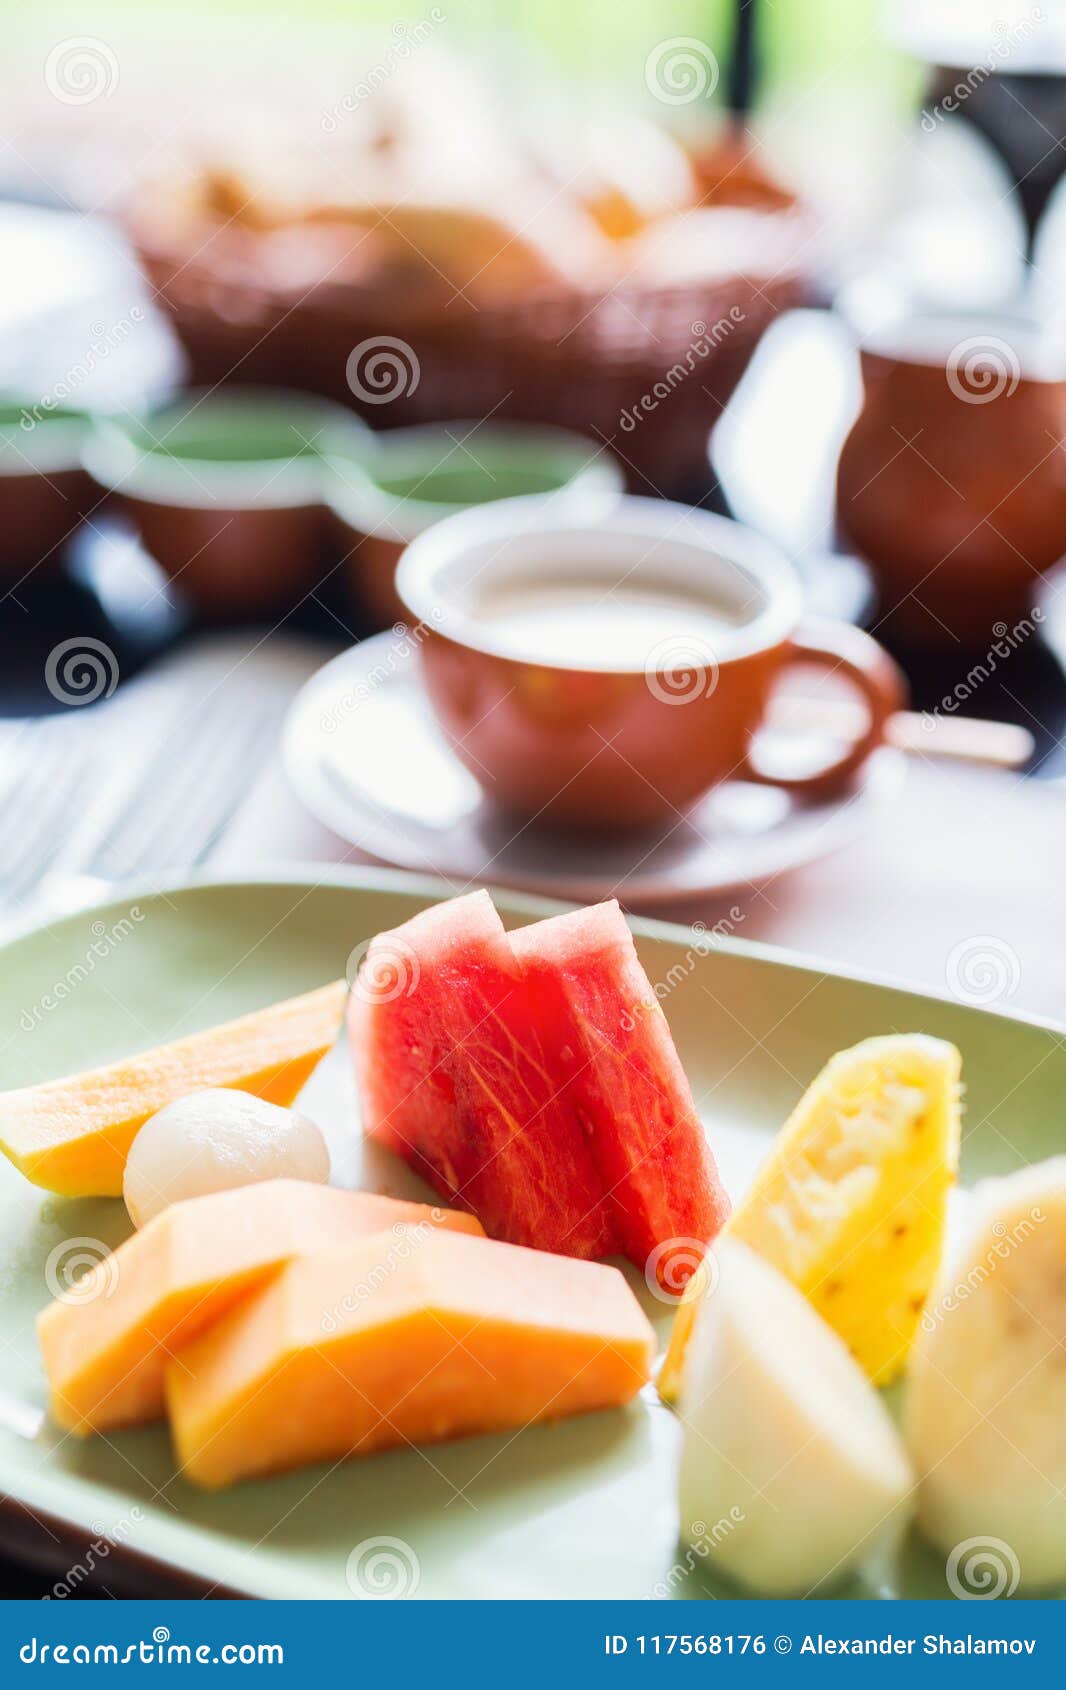 Delicious Fruits for Breakfast Stock Photo - Image of food, fruit ...